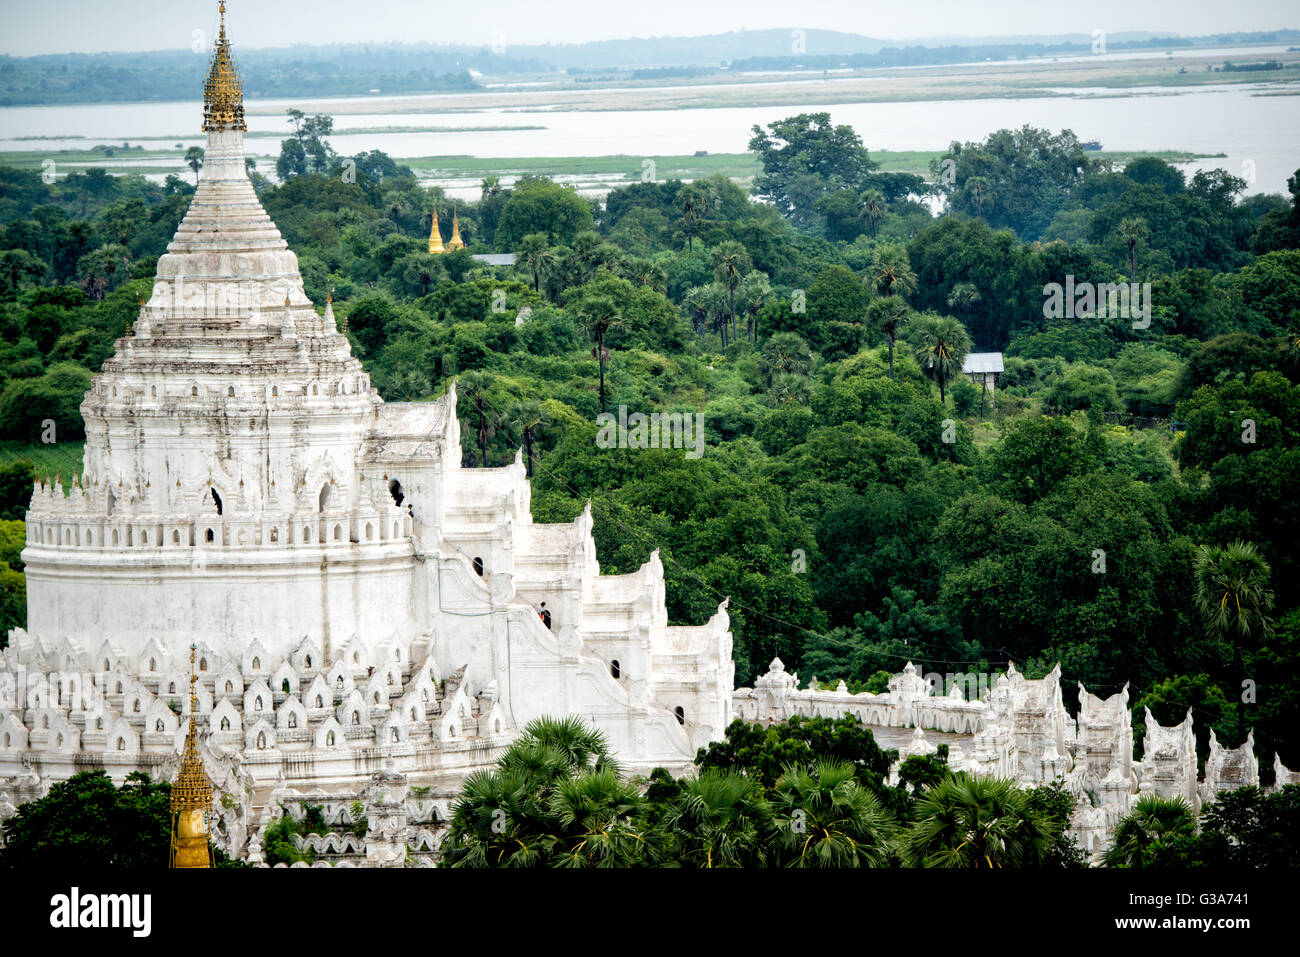 Built in 1816 and located in Mingun, not far from Mandalay, Hsinbyume Pagoda is designed in inspiration from Buddhist mythological mountain, Mount Meru. It features 7 levels of distinctive and unique whitewashed waves. Stock Photo